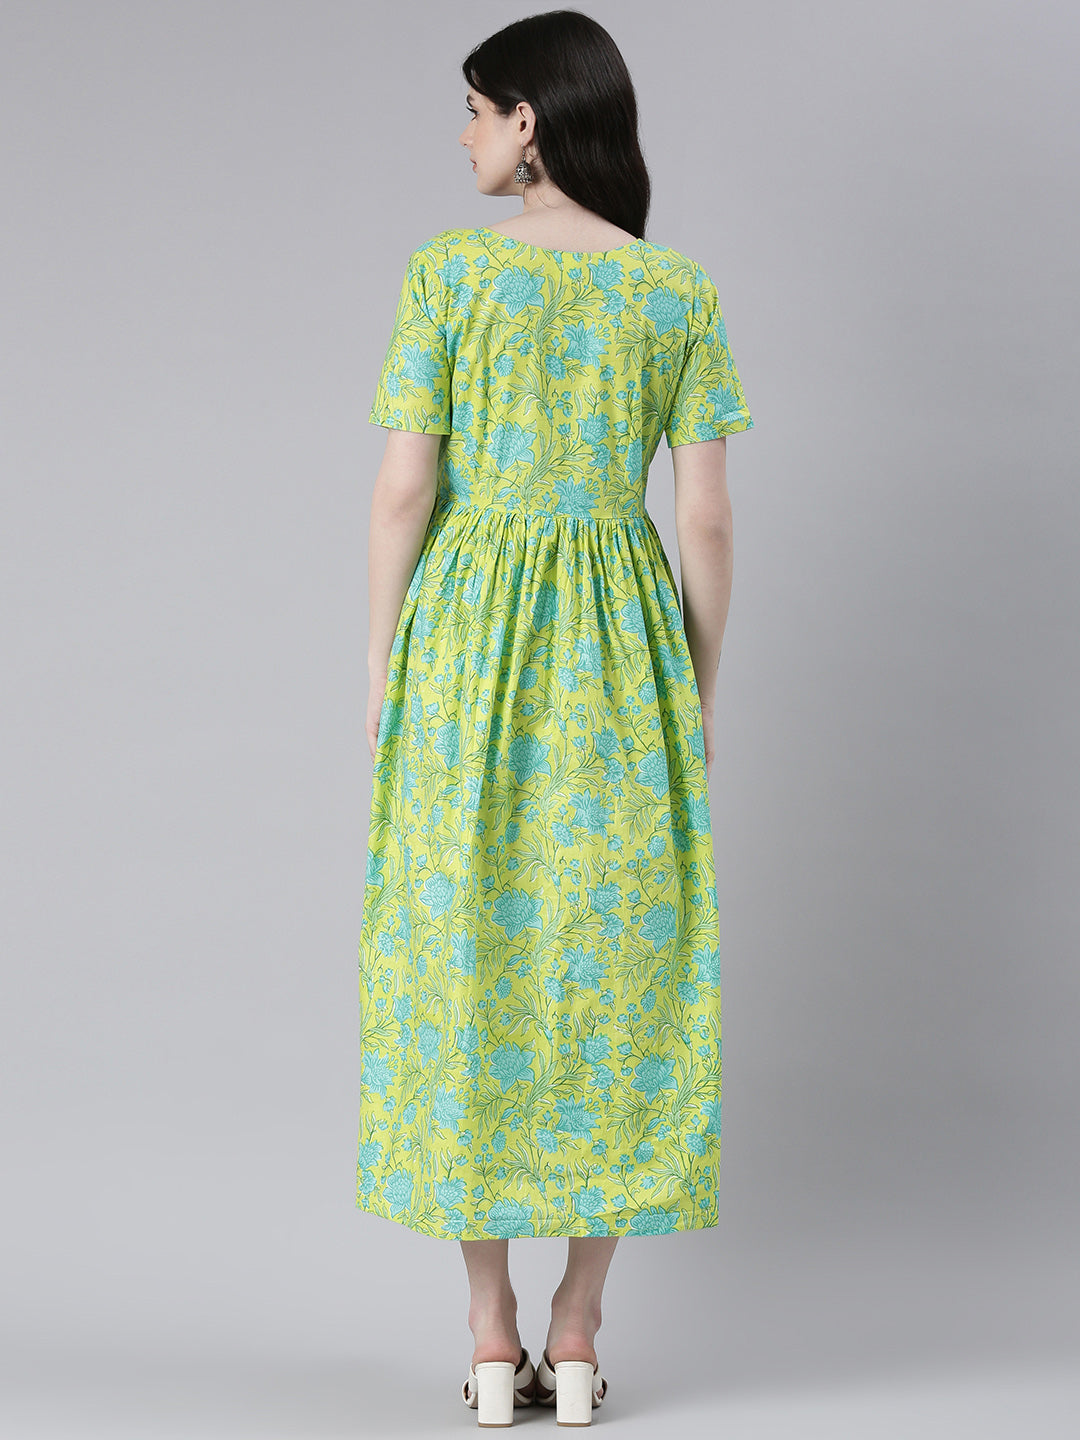 Green and blue Floral Print Maternity Fit & Flare Midi Ethnic Dress